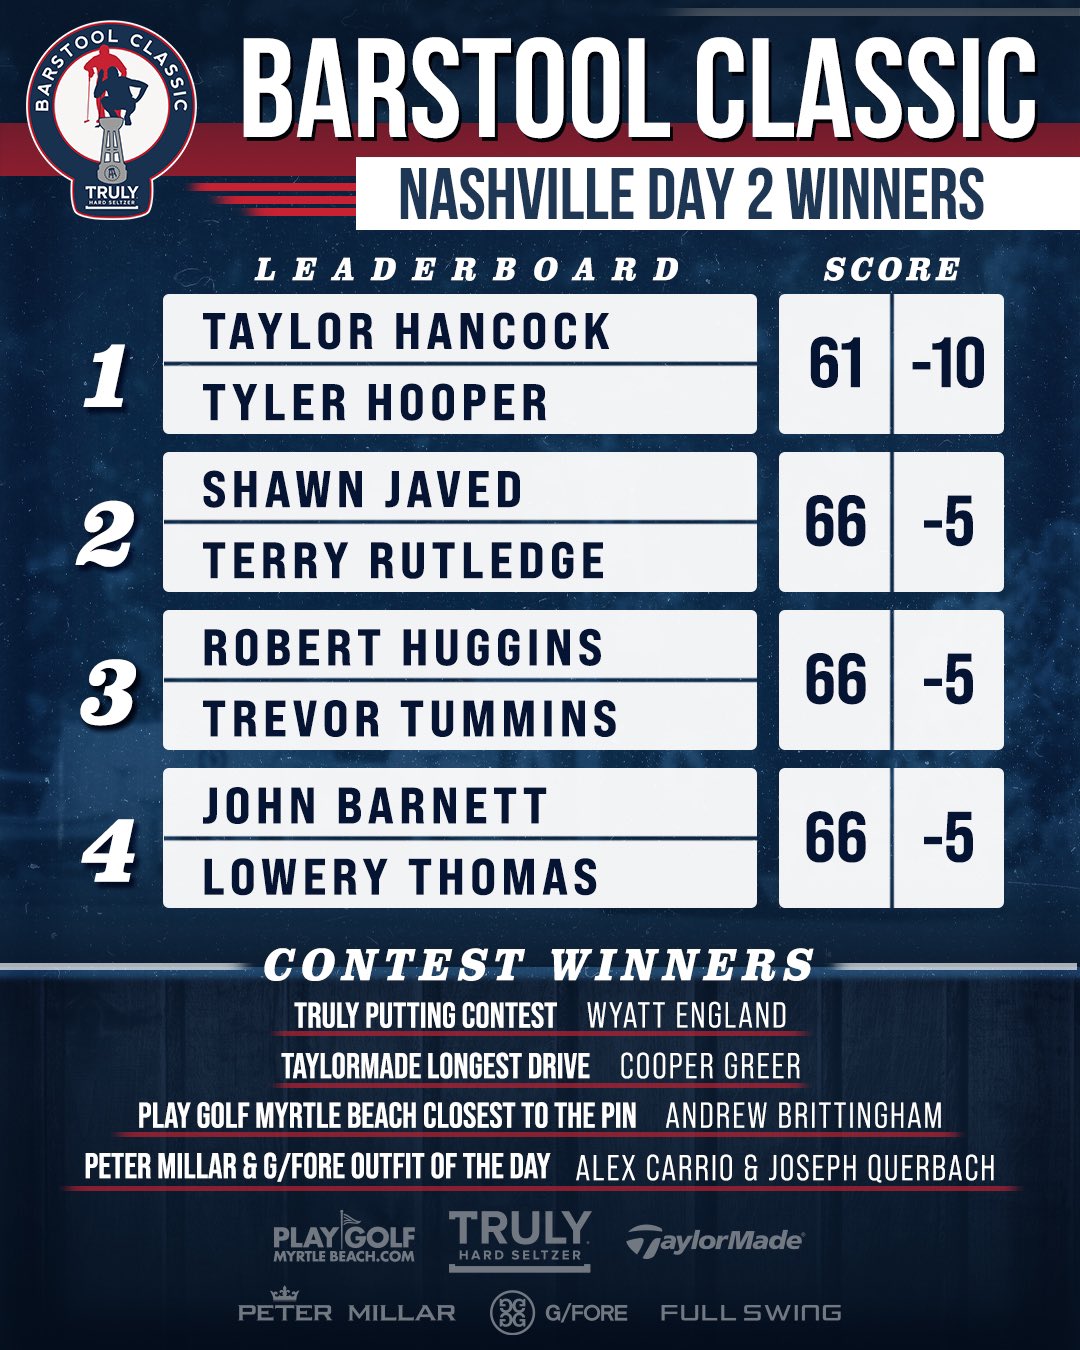 The Barstool Classic on Twitter "TWO days in Nashville this week